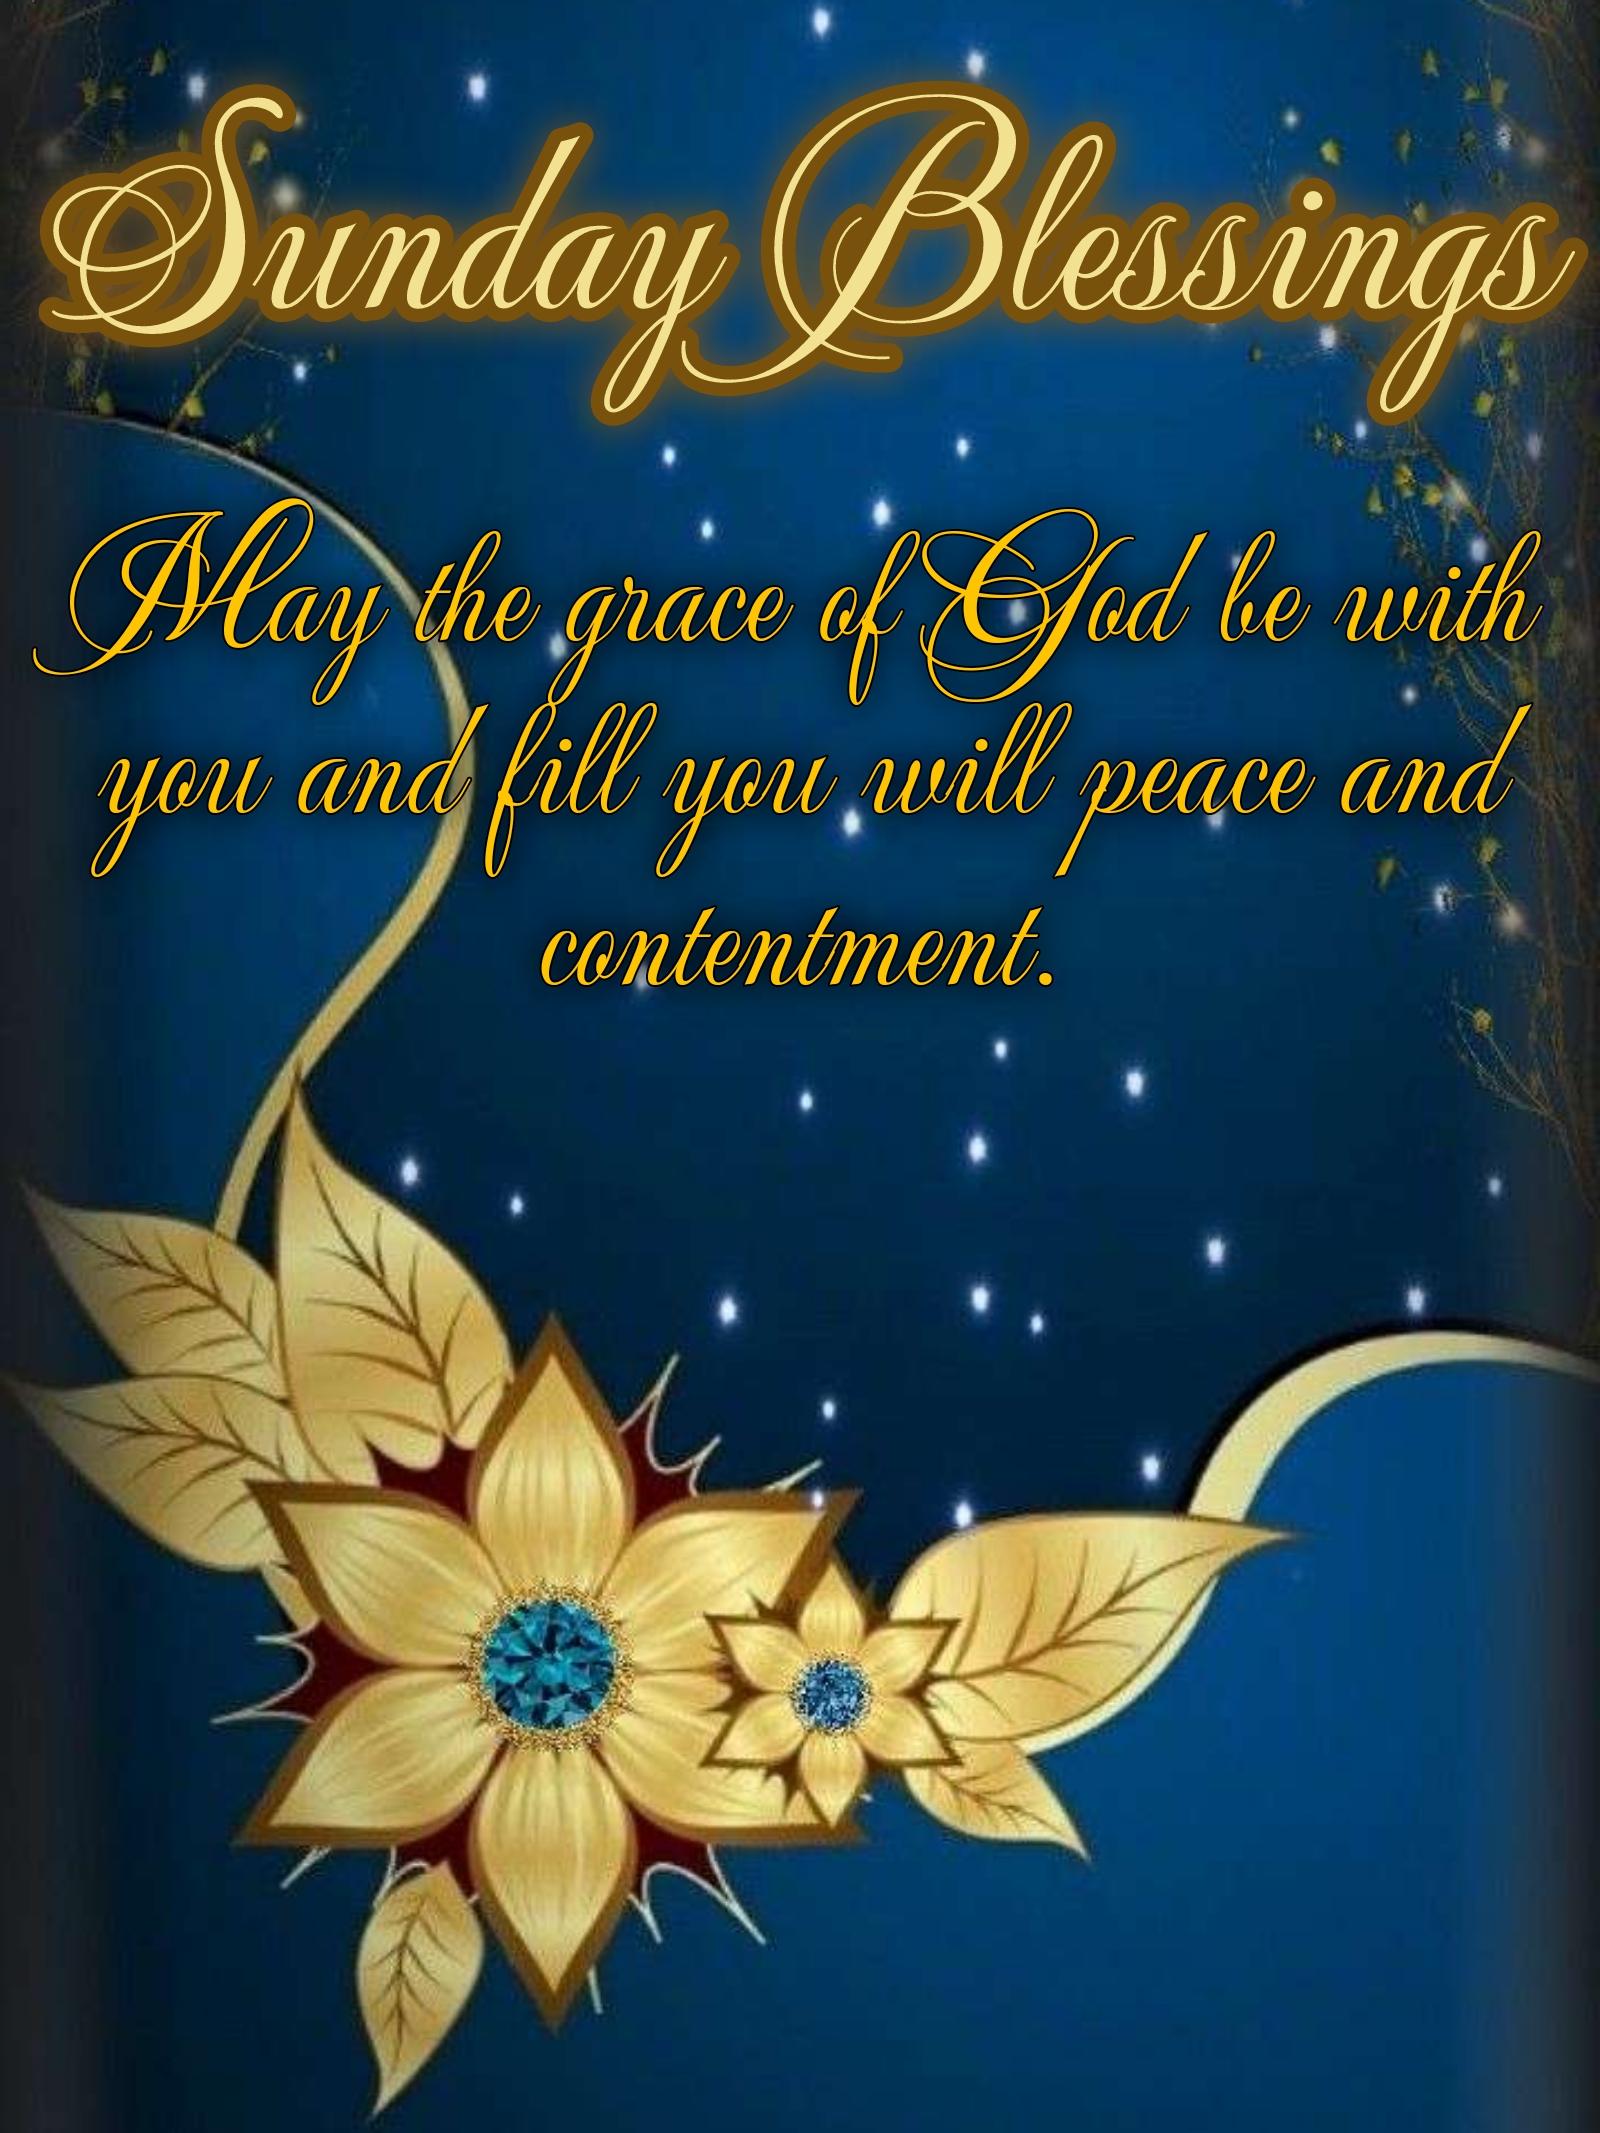 May the grace of God be with you and fill you will peace and contentment